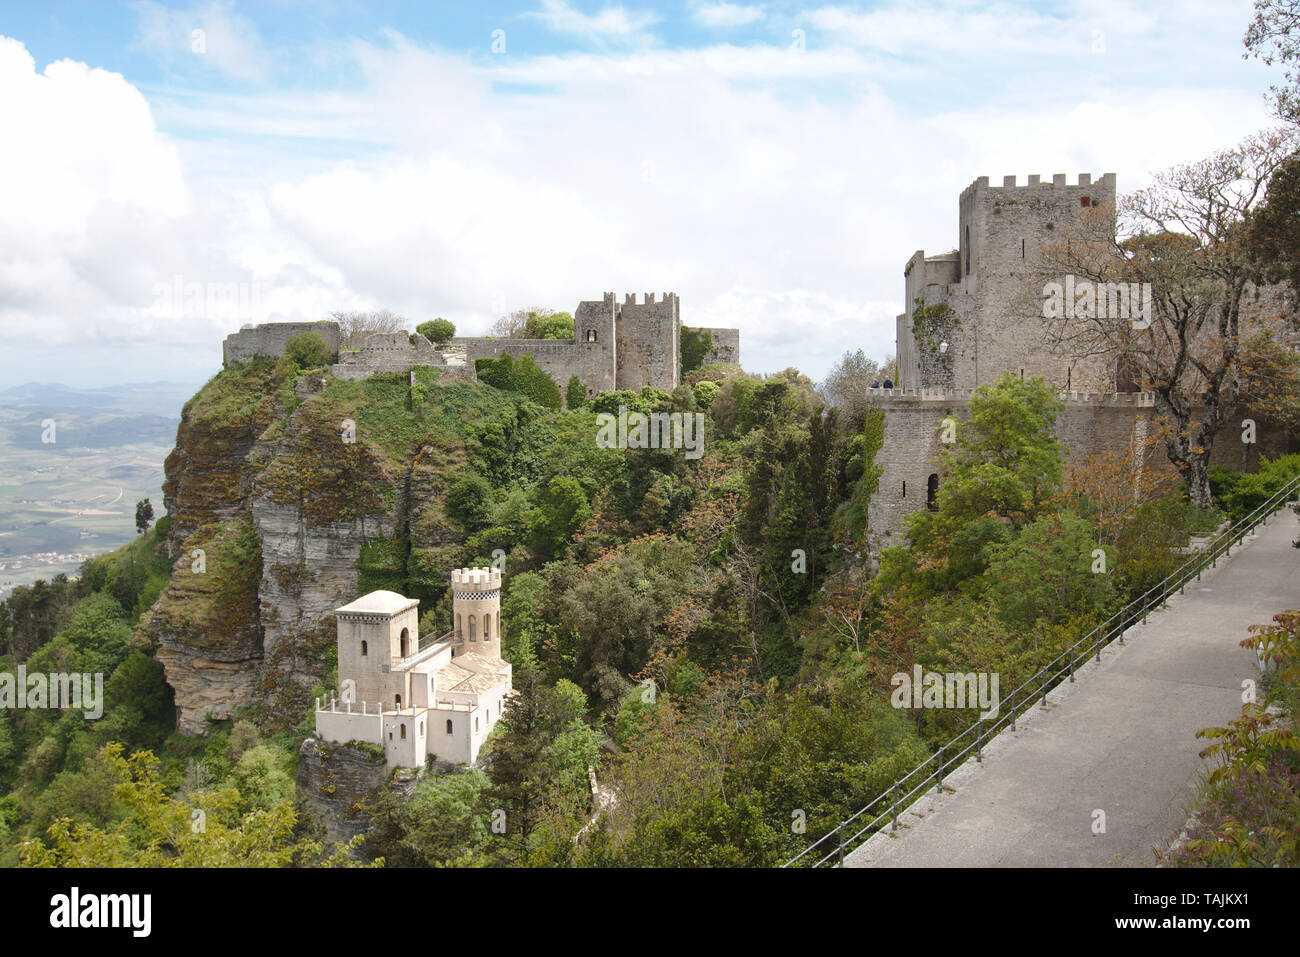 Ruins of the castle in Erice, Italy Stock Photo